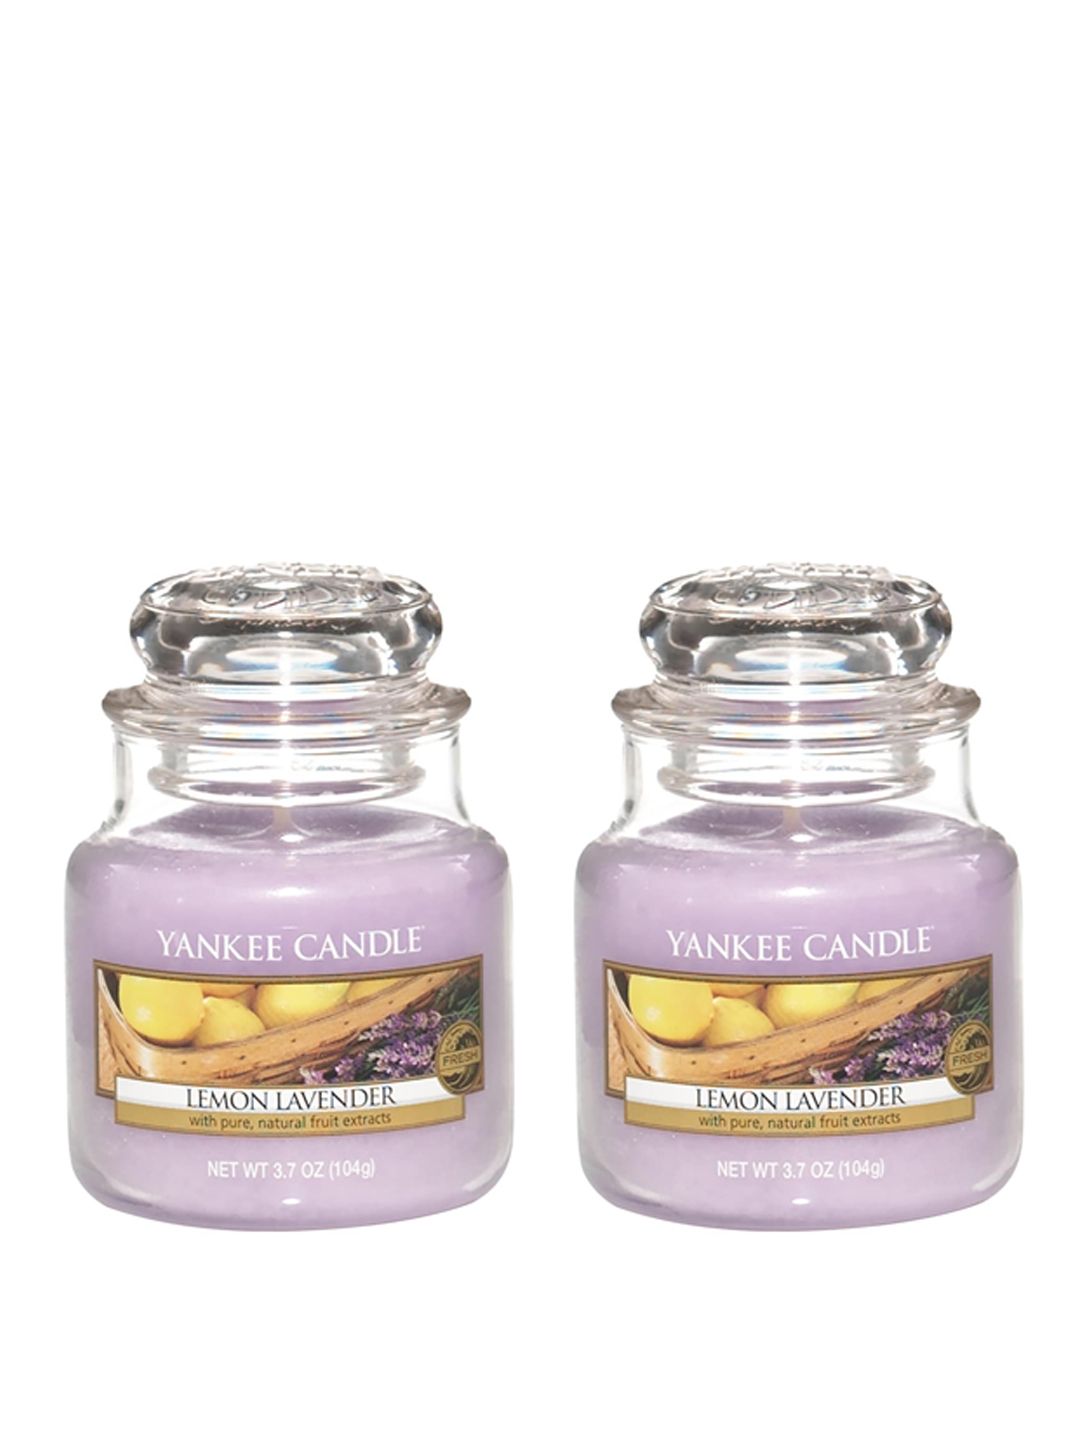 YANKEE CANDLE Set of 2 Lemon Lavender Scented Candles Price in India